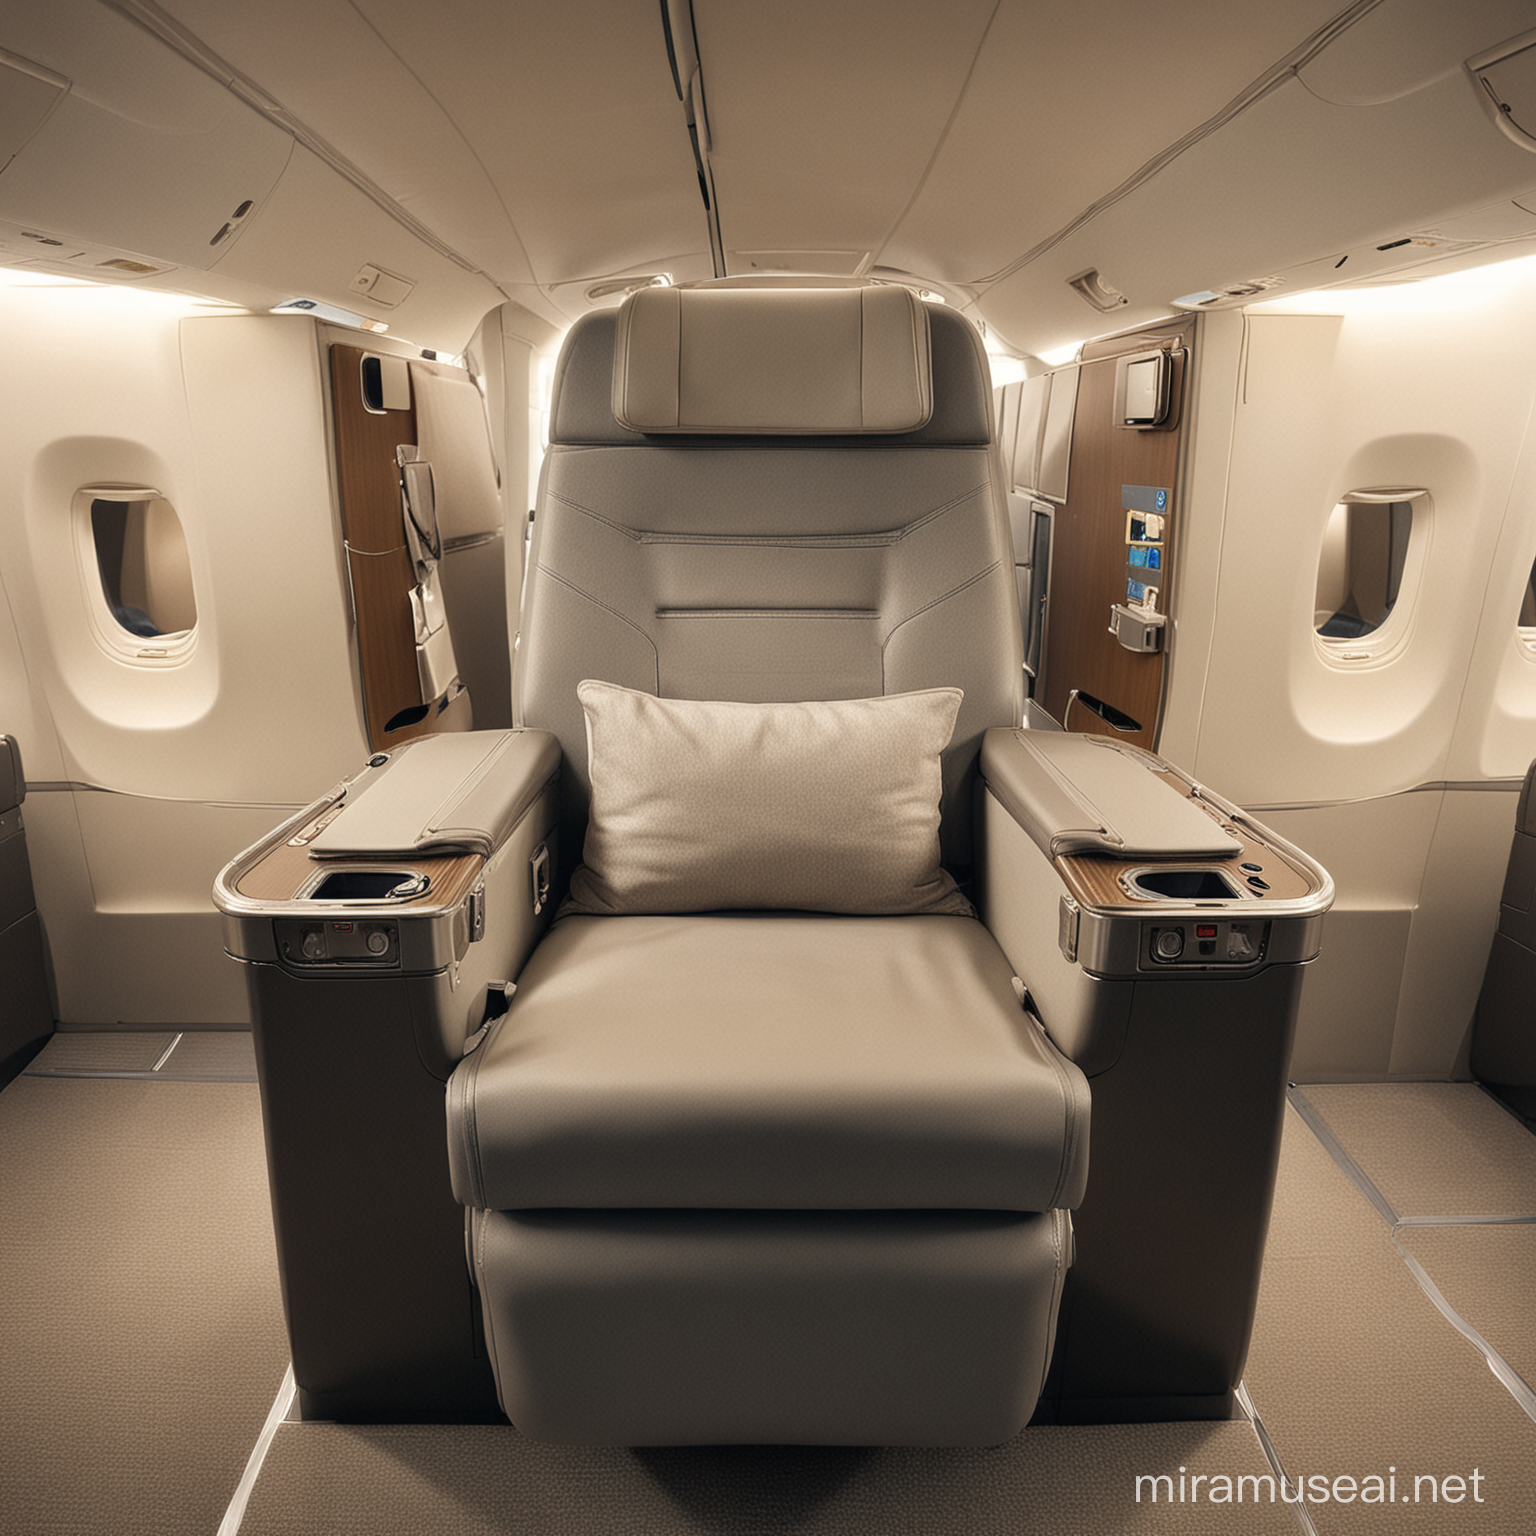 Luxurious FirstClass Airplane Seat with Panoramic Front View